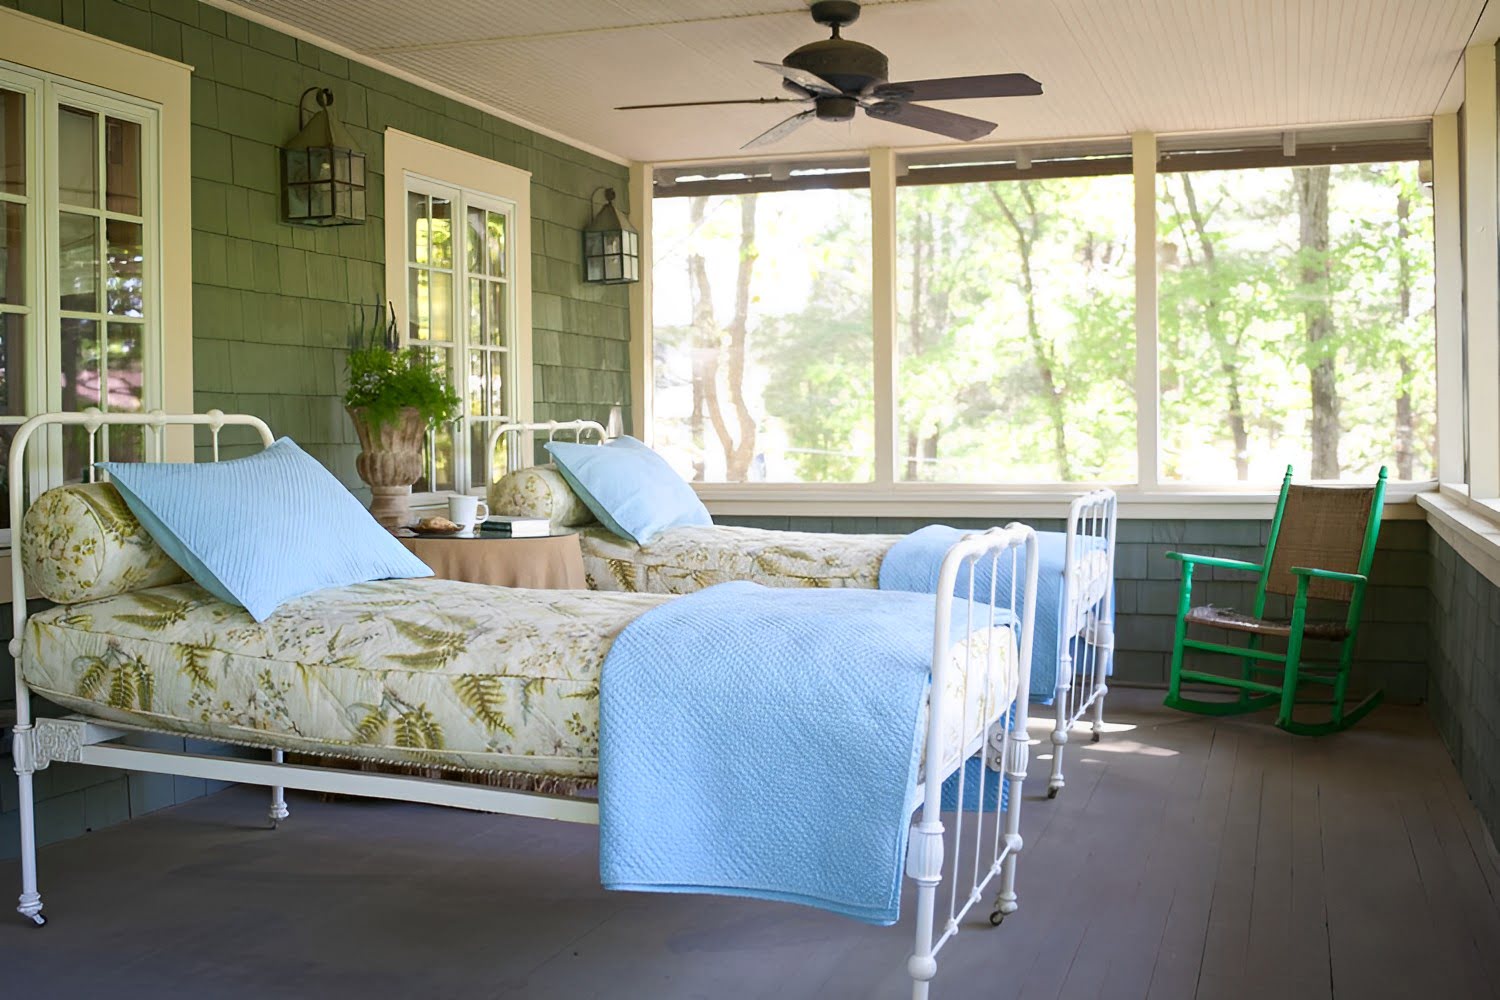 How To Turn An Enclosed Porch Into A Bedroom